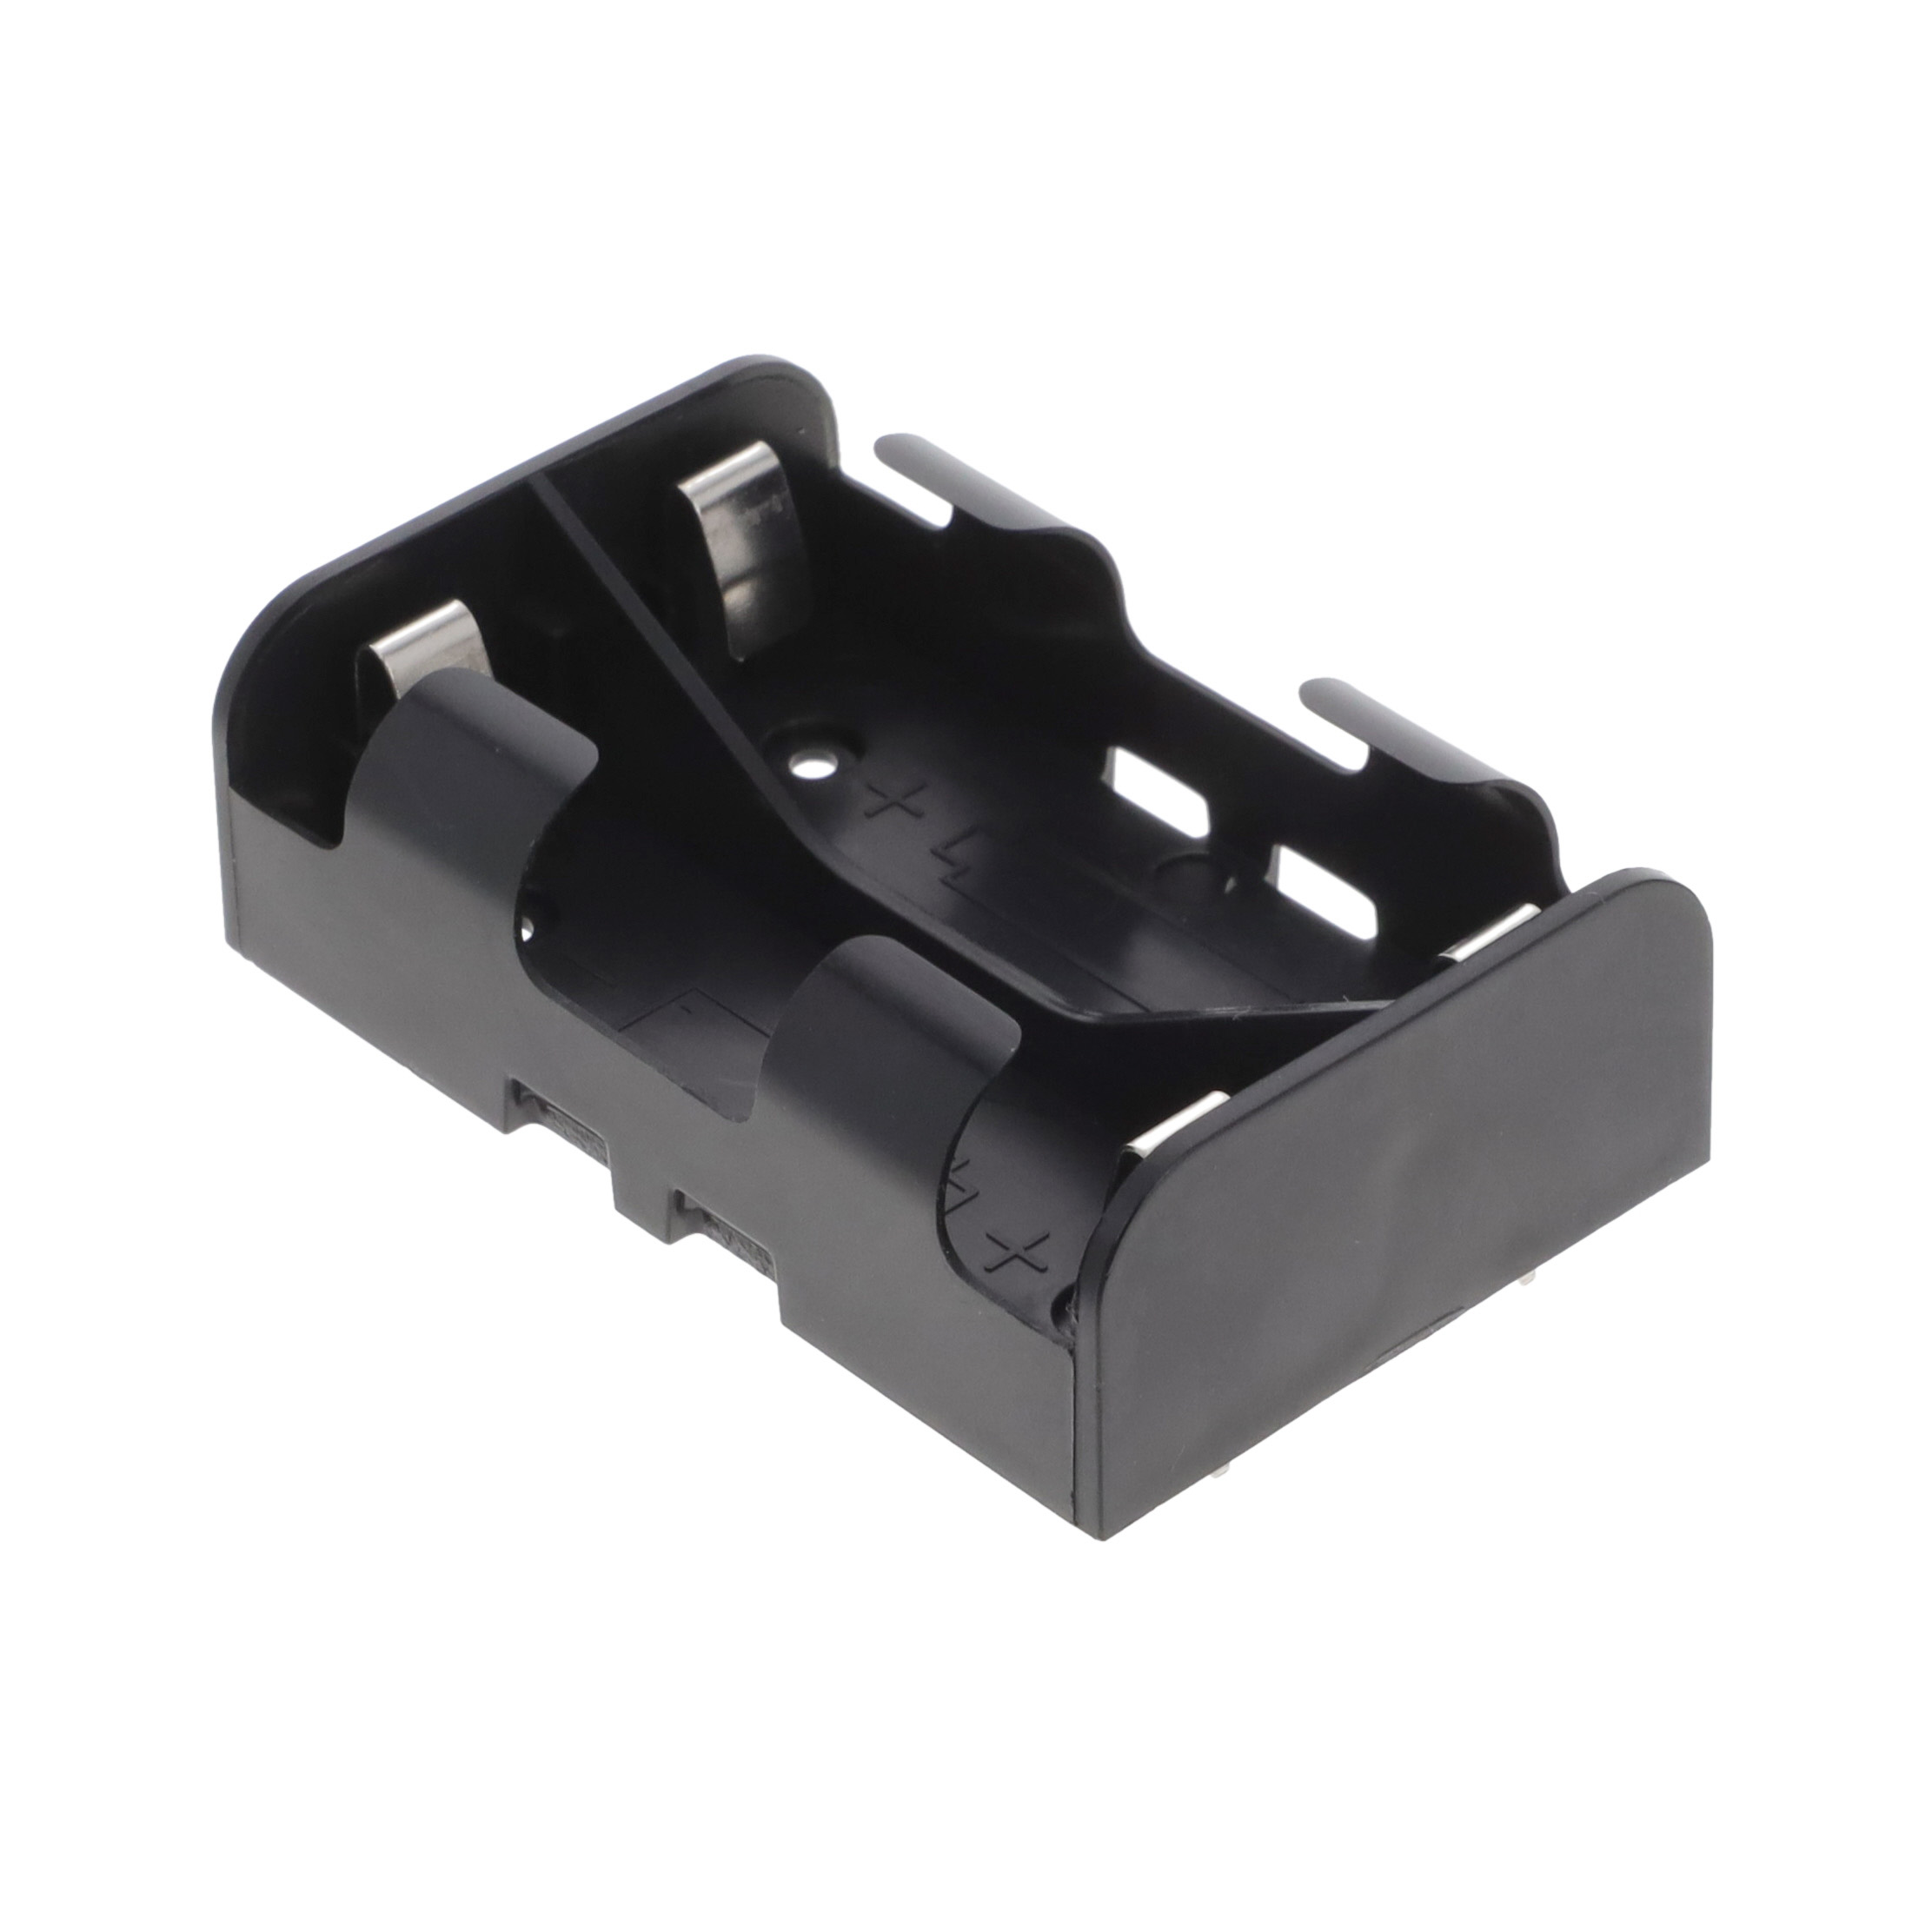 【BK-6210】BATTERY HOLDER A 2 CELL PC PIN